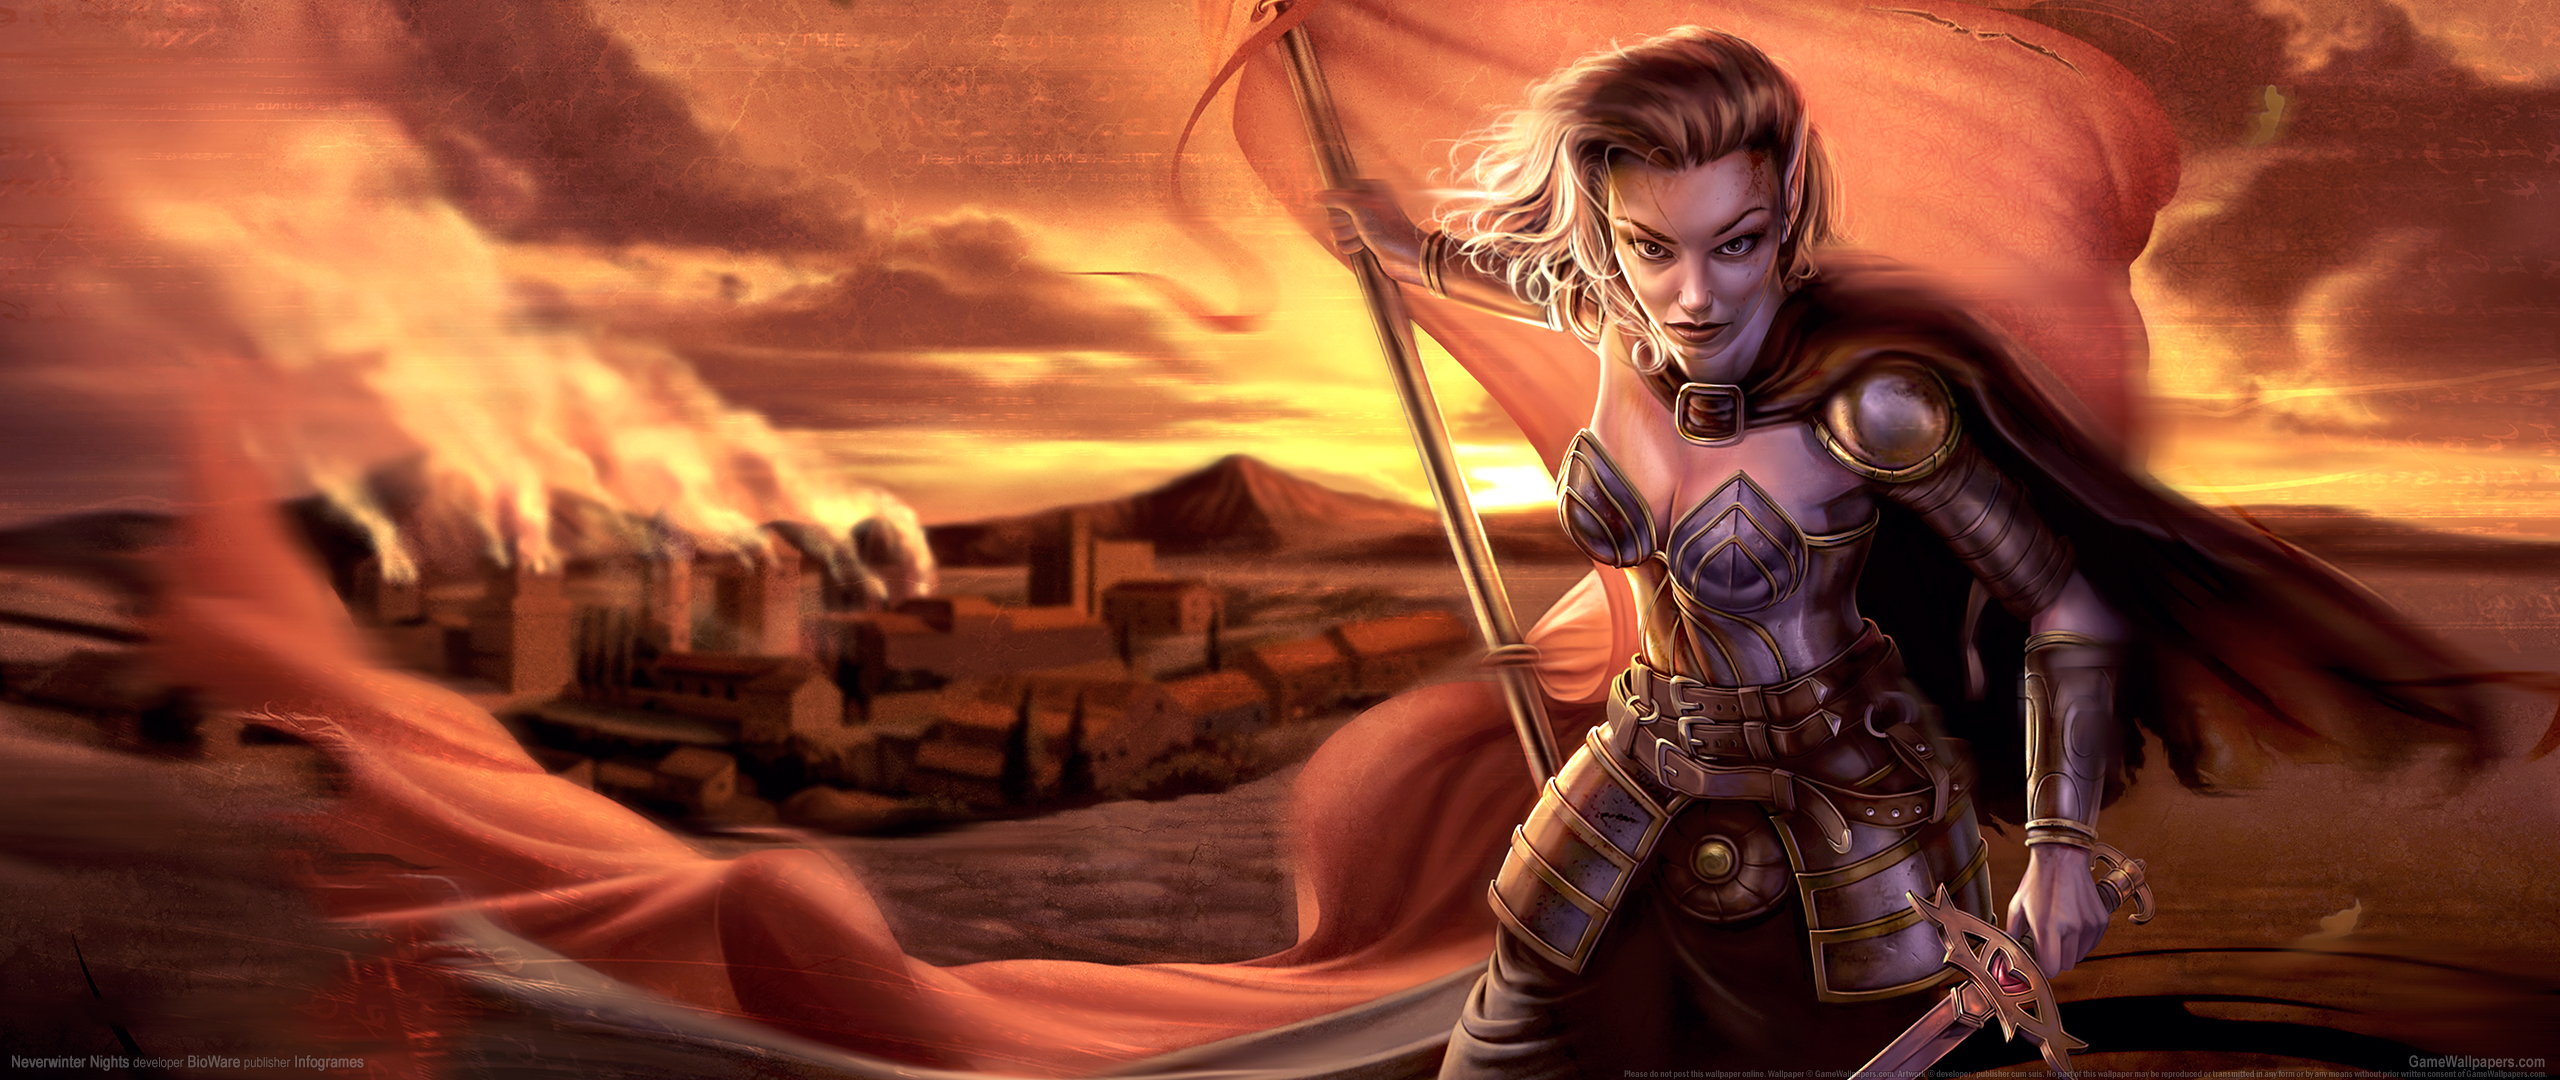 Neverwinter Nights 2560x1080 wallpaper or background 11